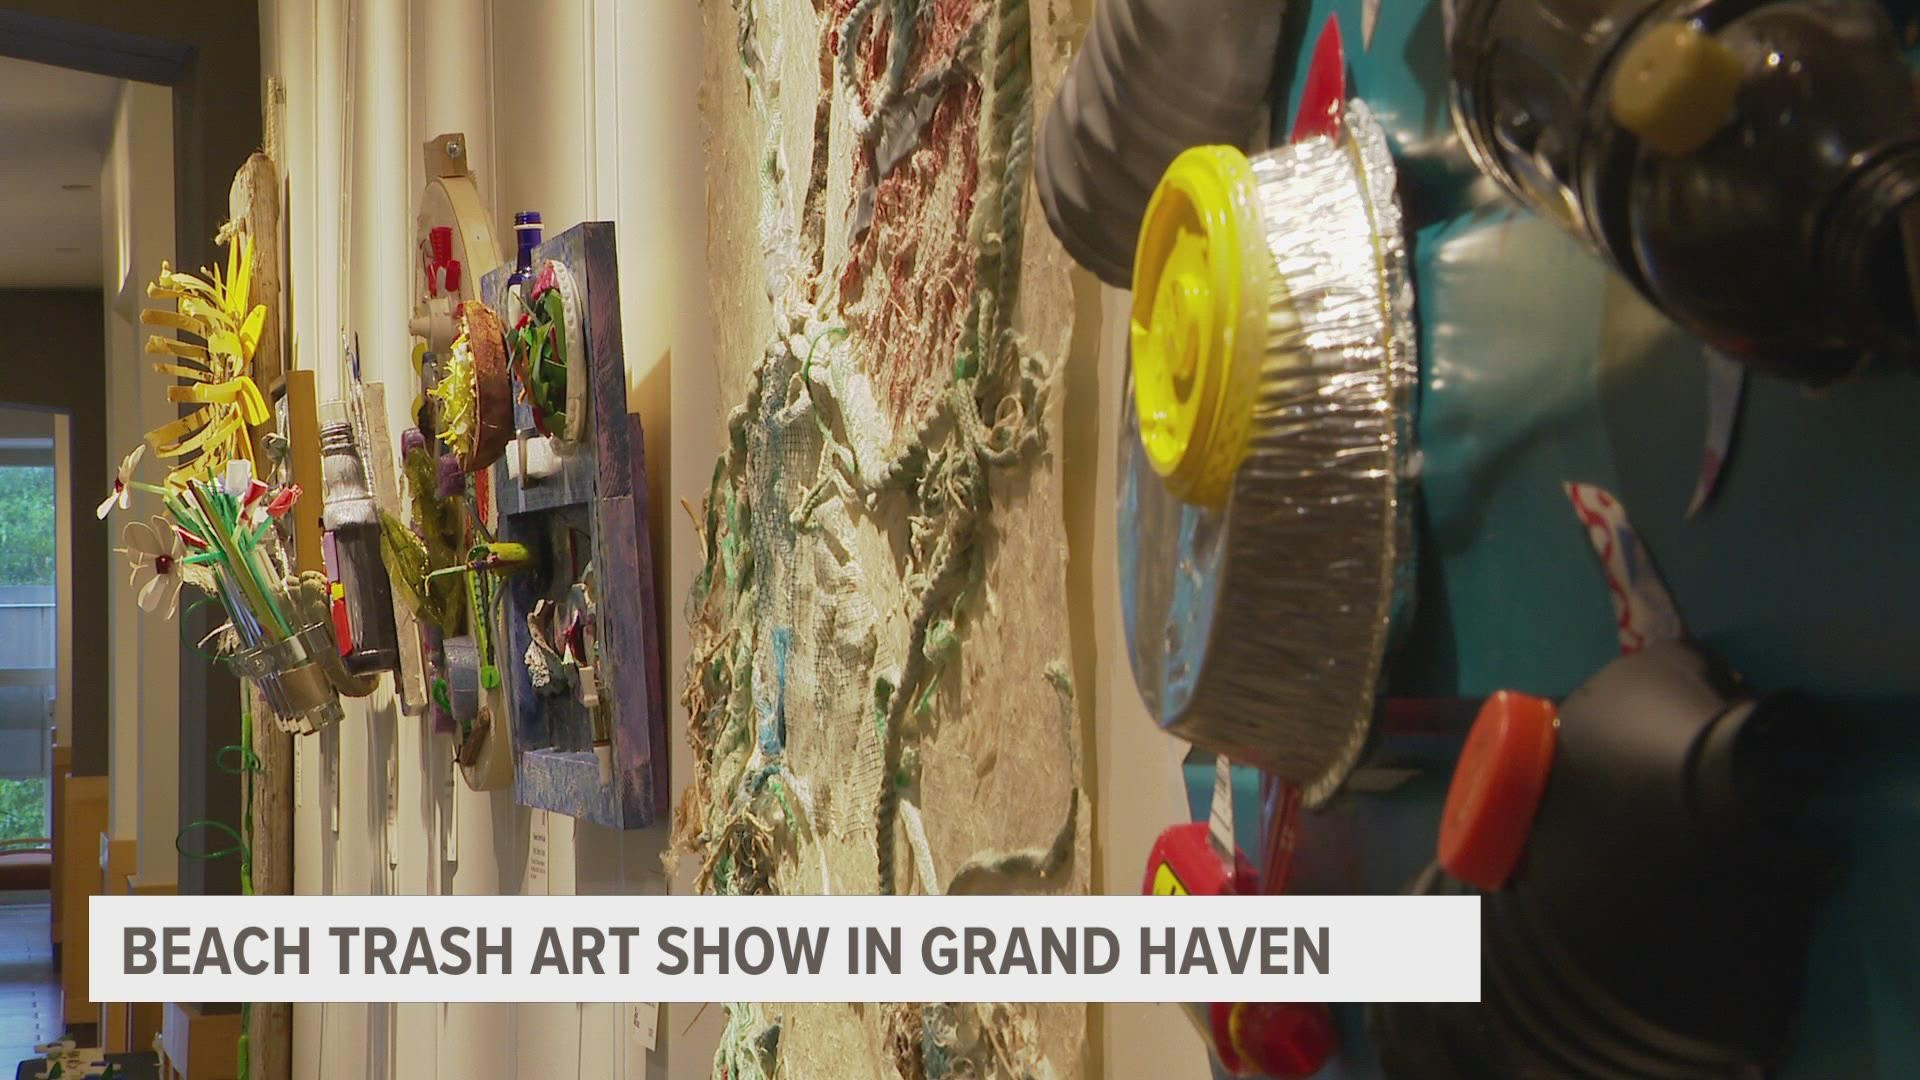 25 local artists are presenting their works Friday, and they're all made up of trash collected from Lake Michigan's shoreline in Grand Haven.